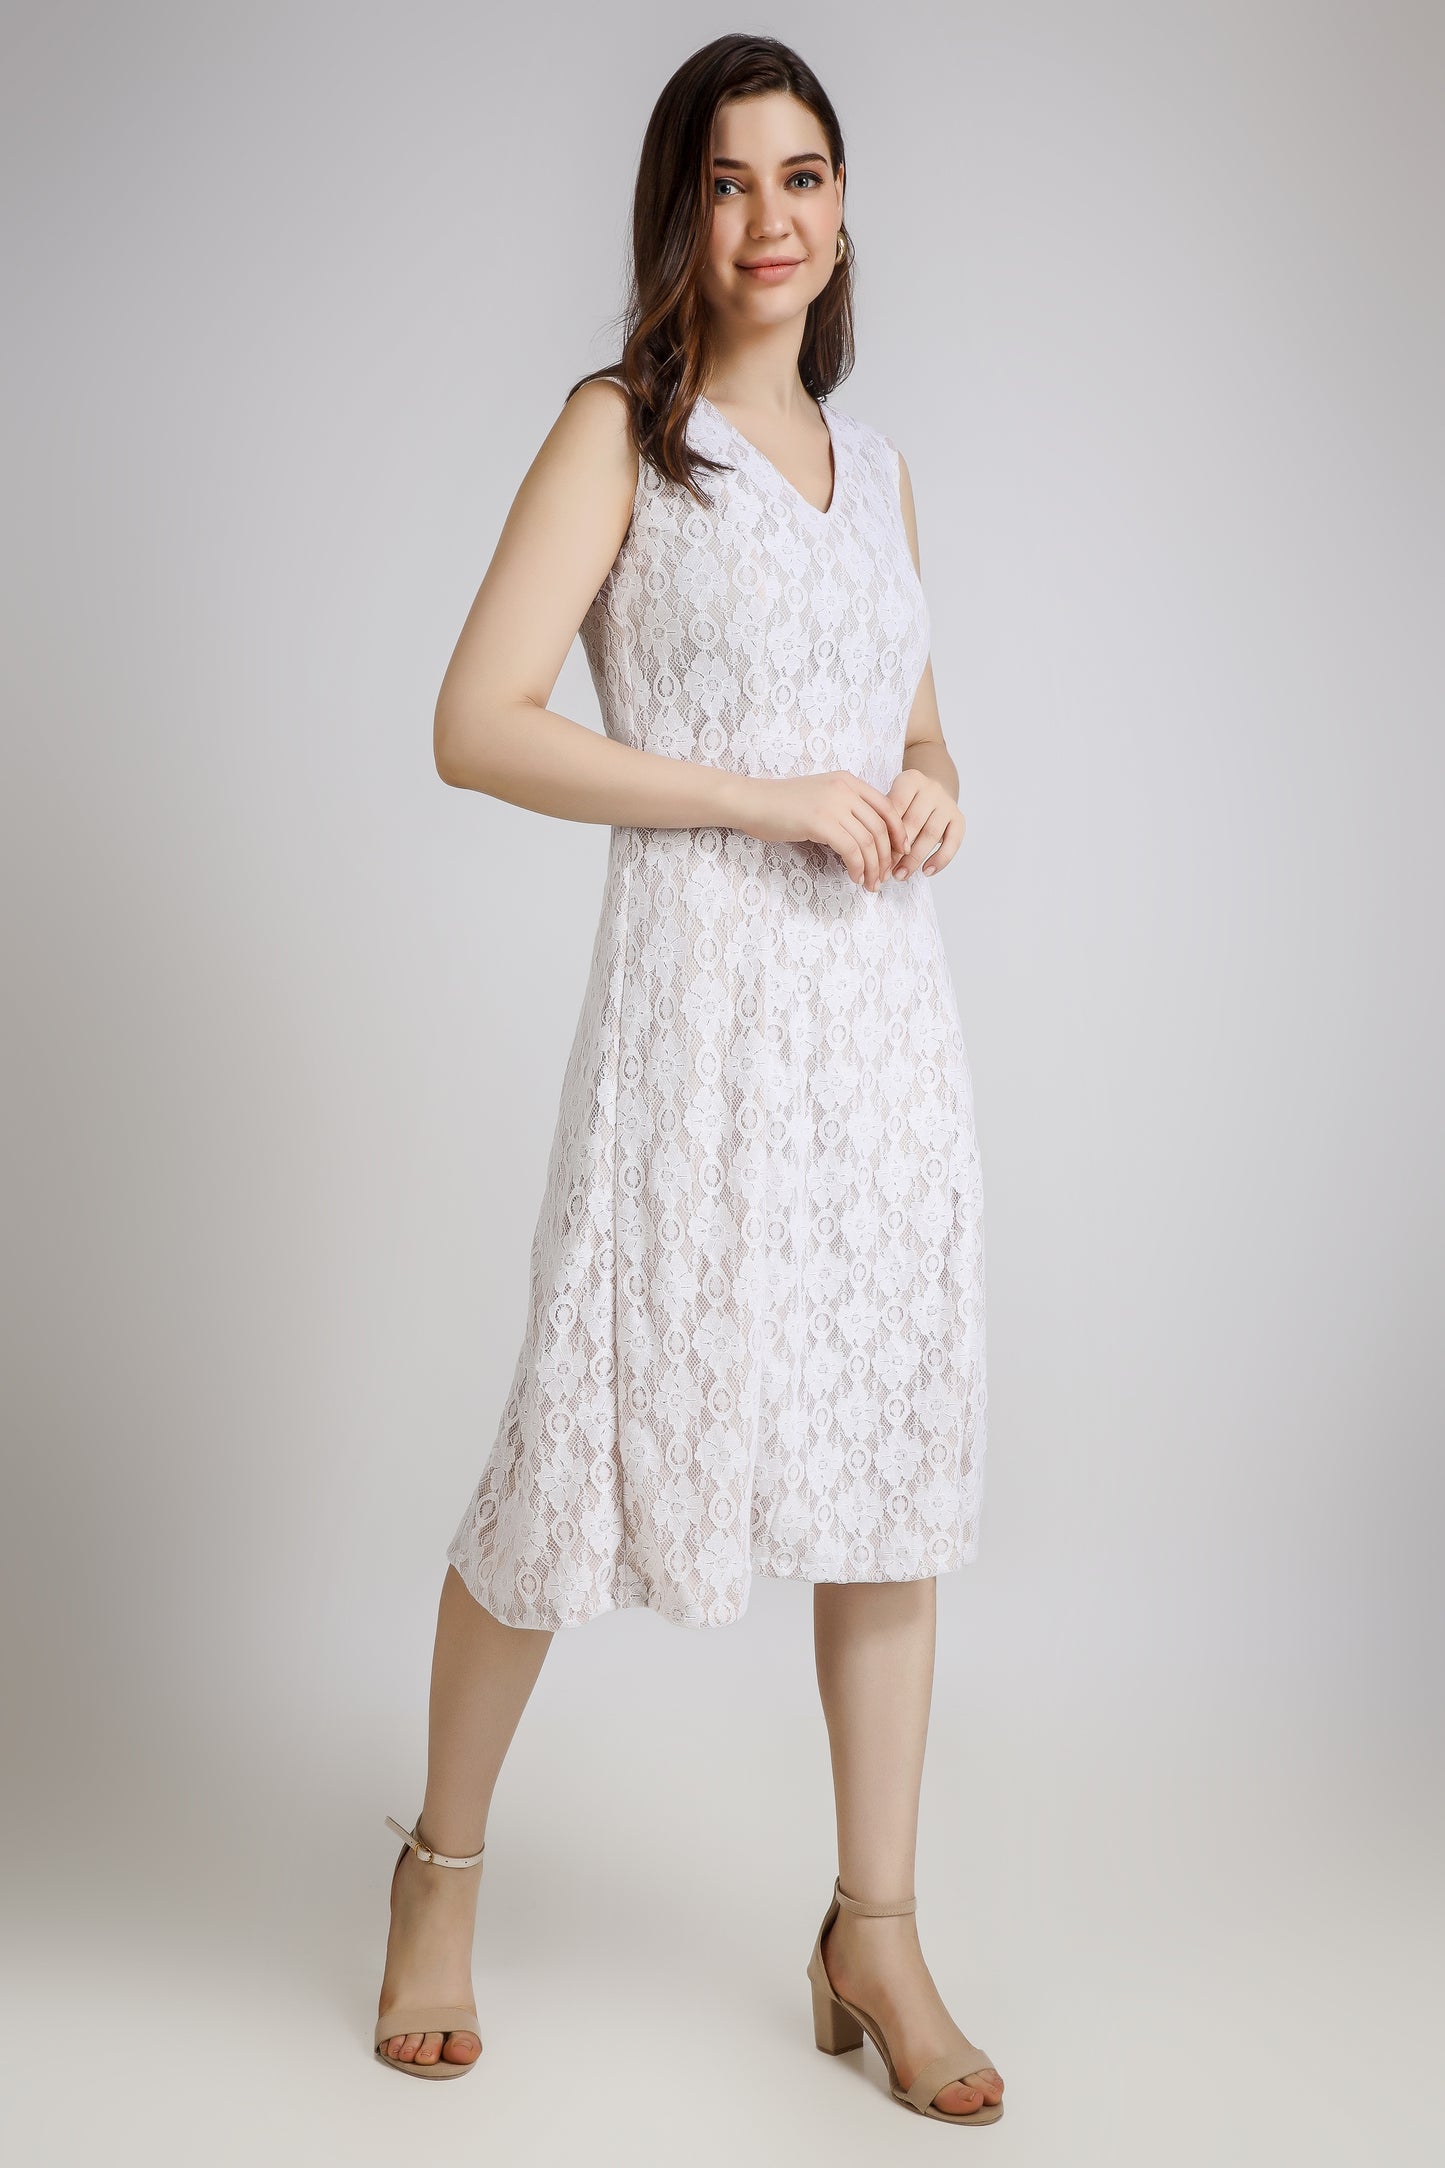 Vomendi White Lace Work Bodycon Dress with Princess Seam and Cut Sleeves